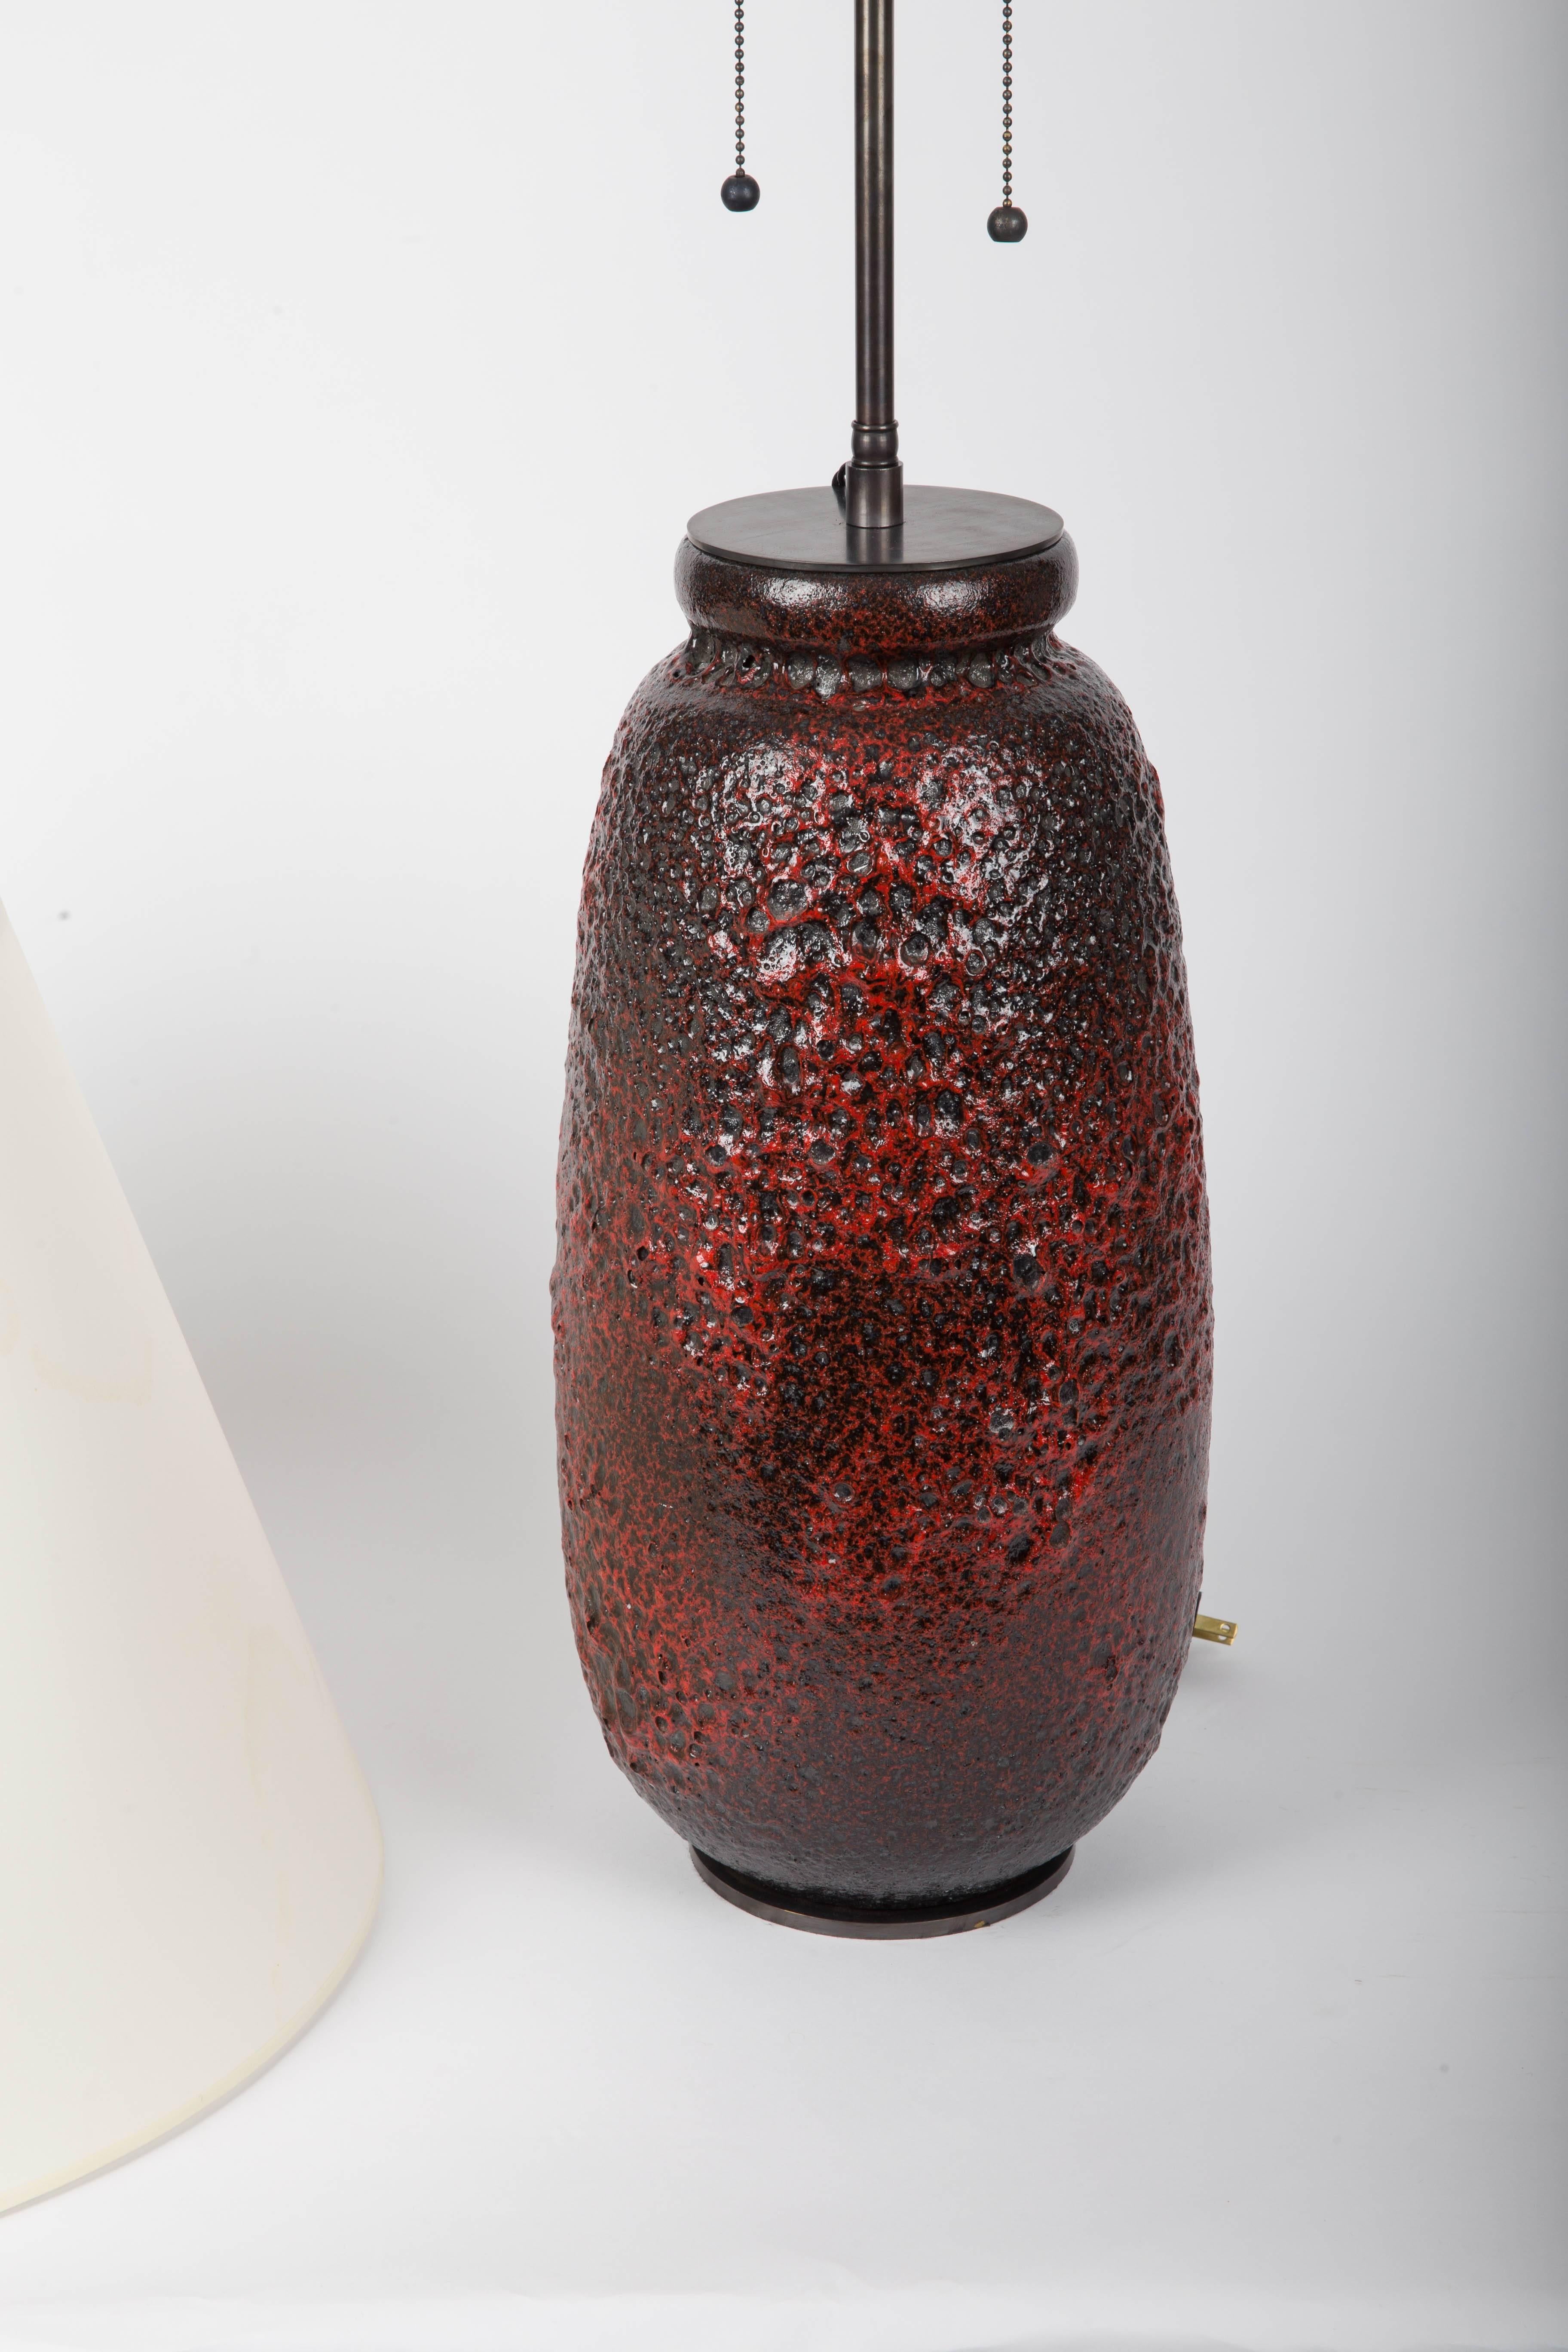 Red Volcanic Glazed Vase Converted into Lamp 2